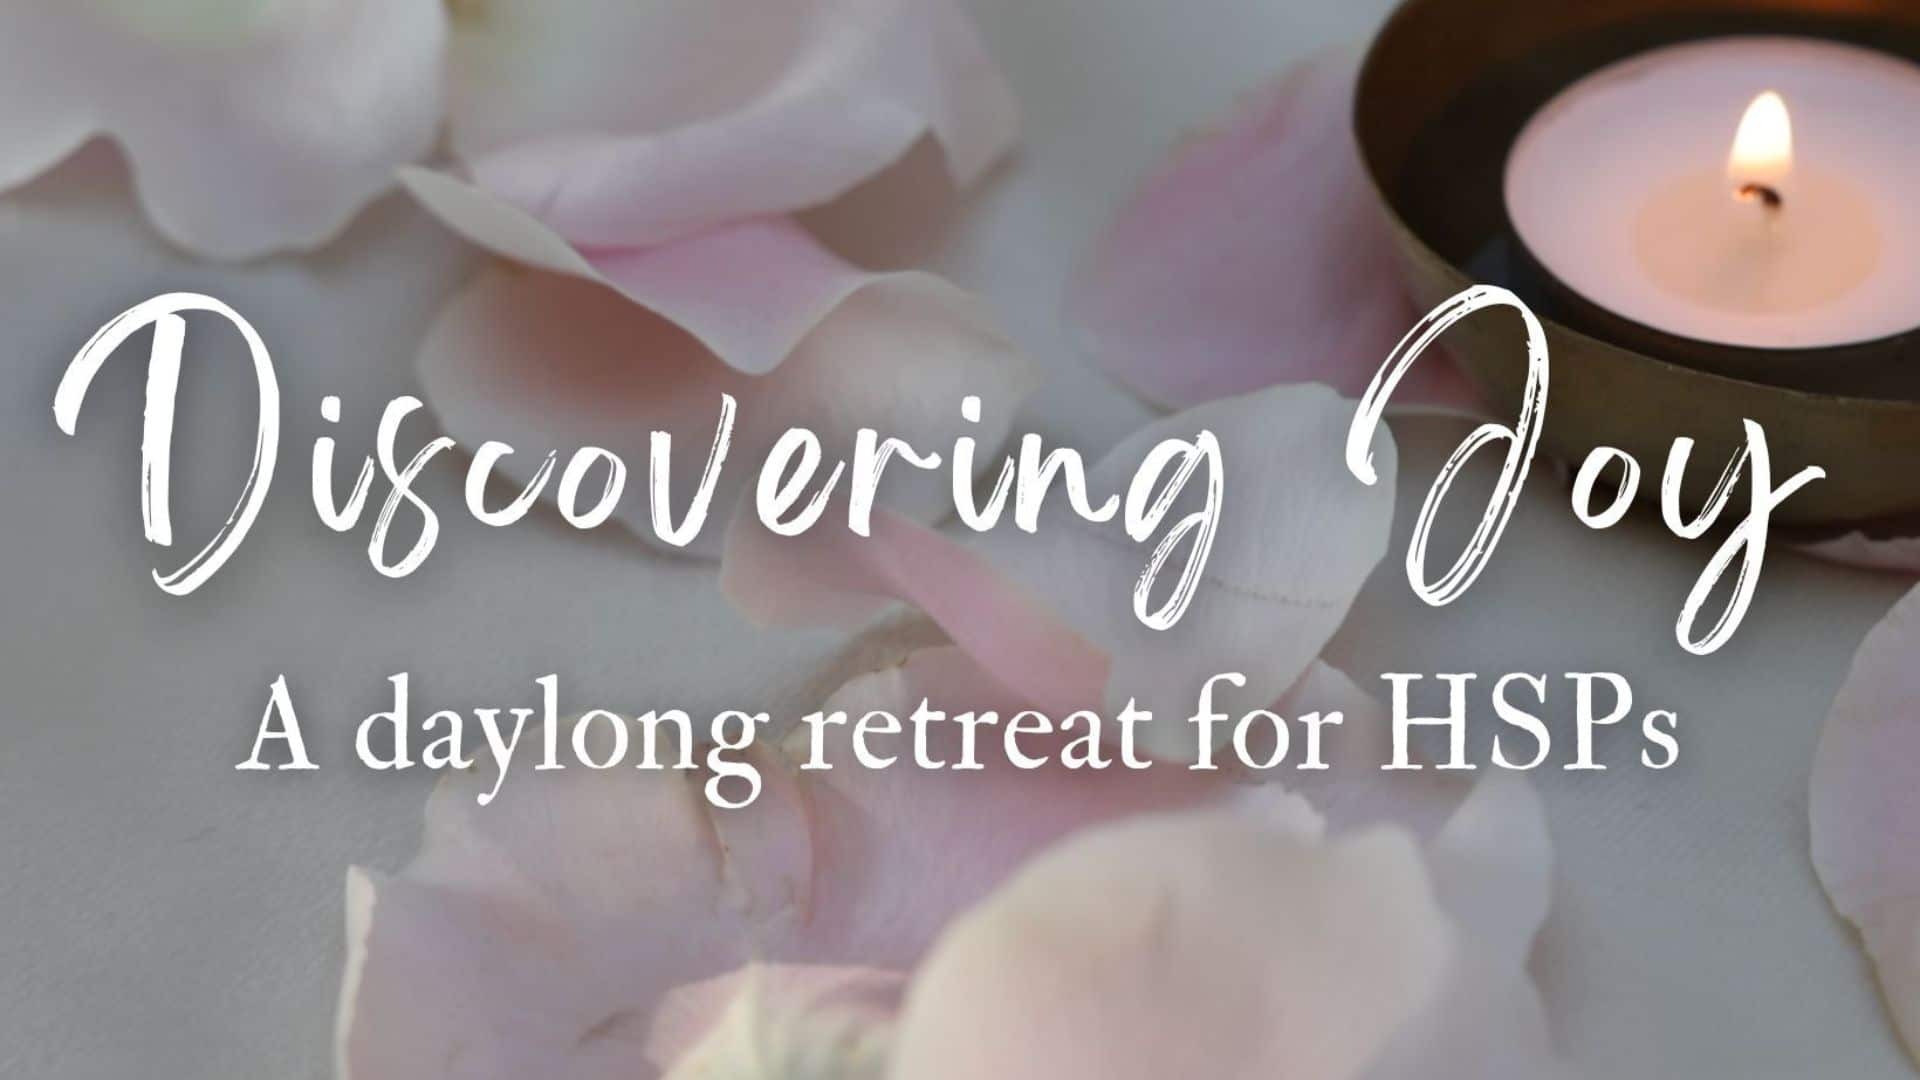 Learn more about the Discovering Joy retreat for HSPs.